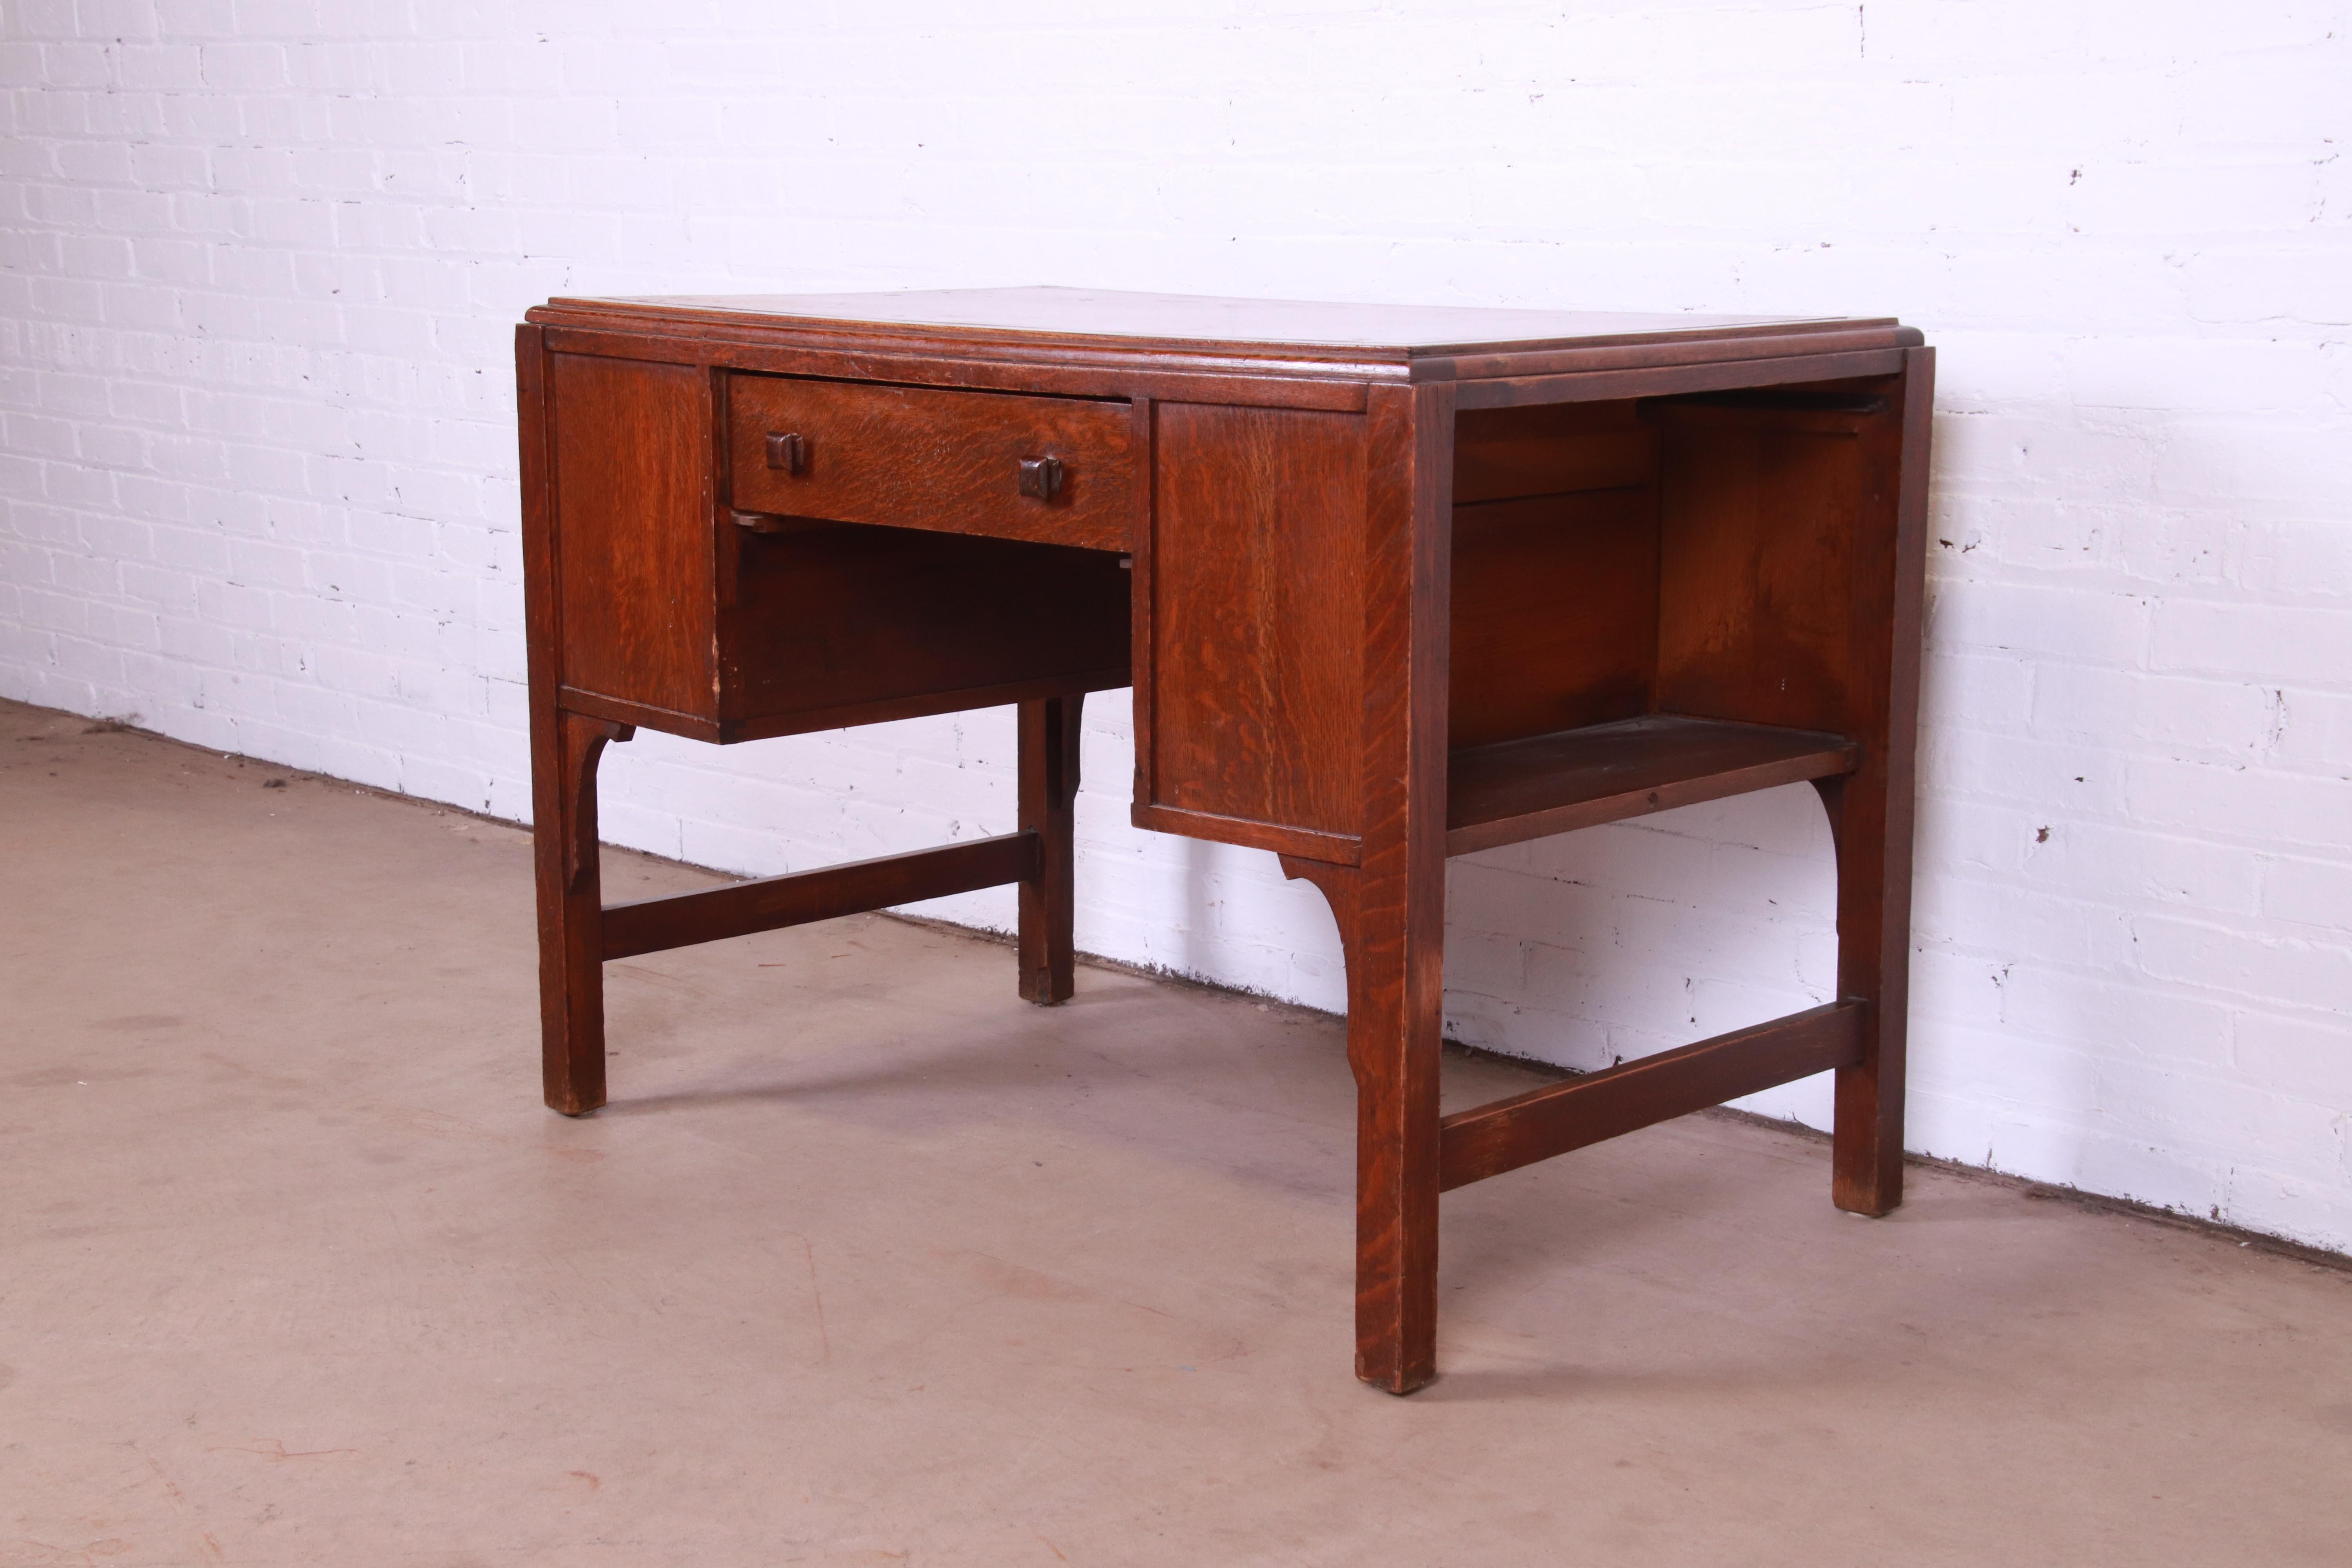 American Antique Arts & Crafts Oak Writing Desk From Frank Lloyd Wright's DeRhodes House For Sale